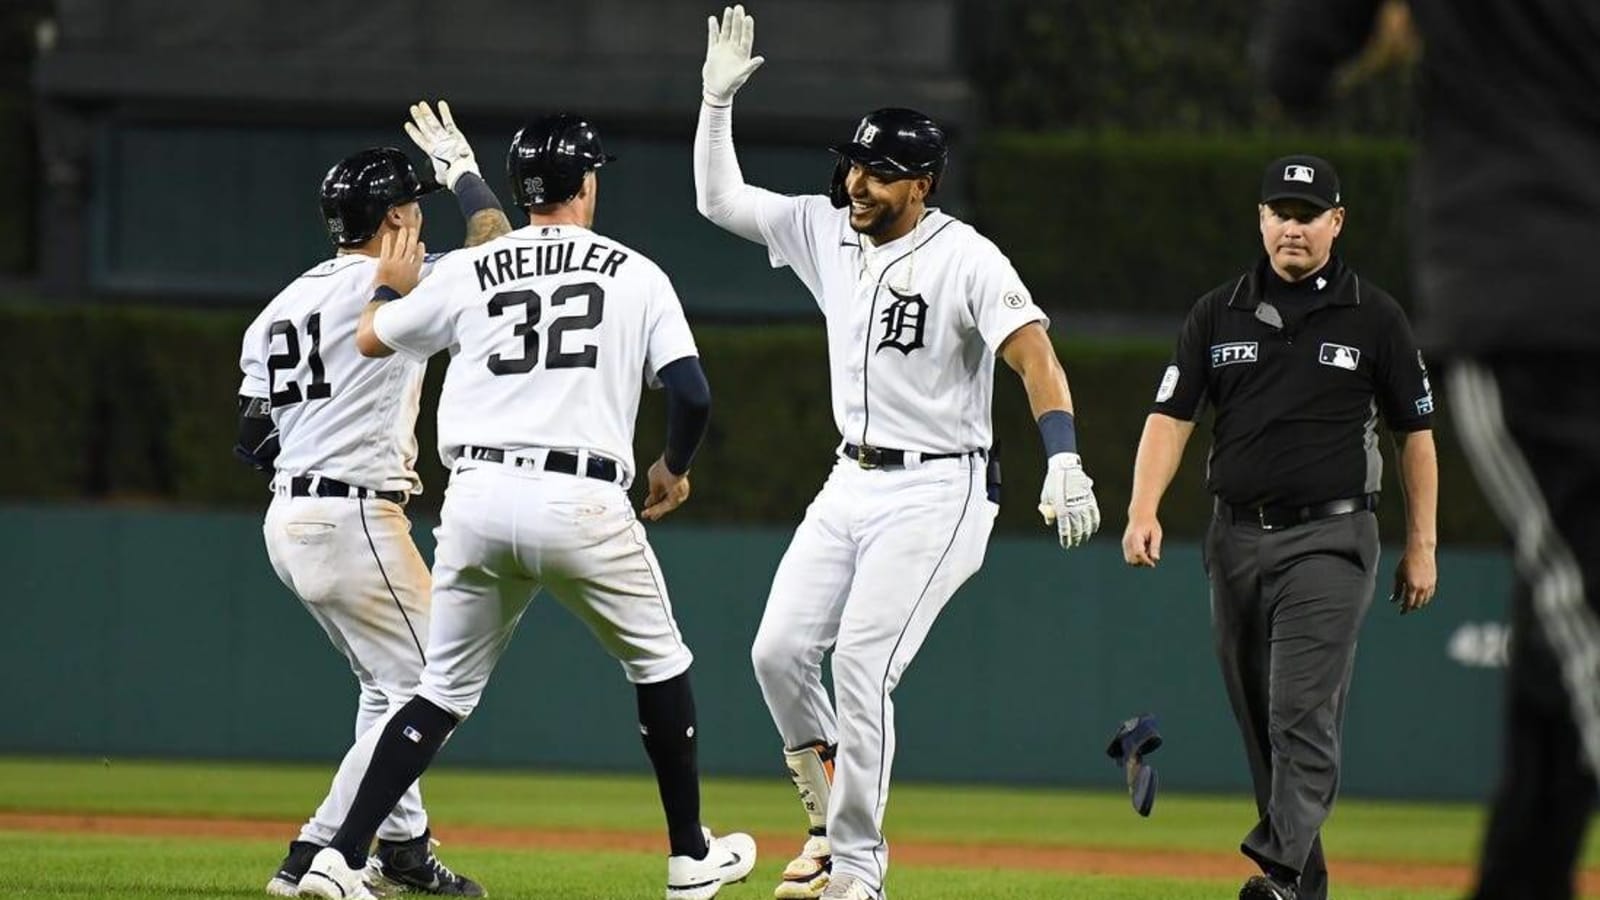 Tigers defeat White Sox on walk-off sac fly in 10th